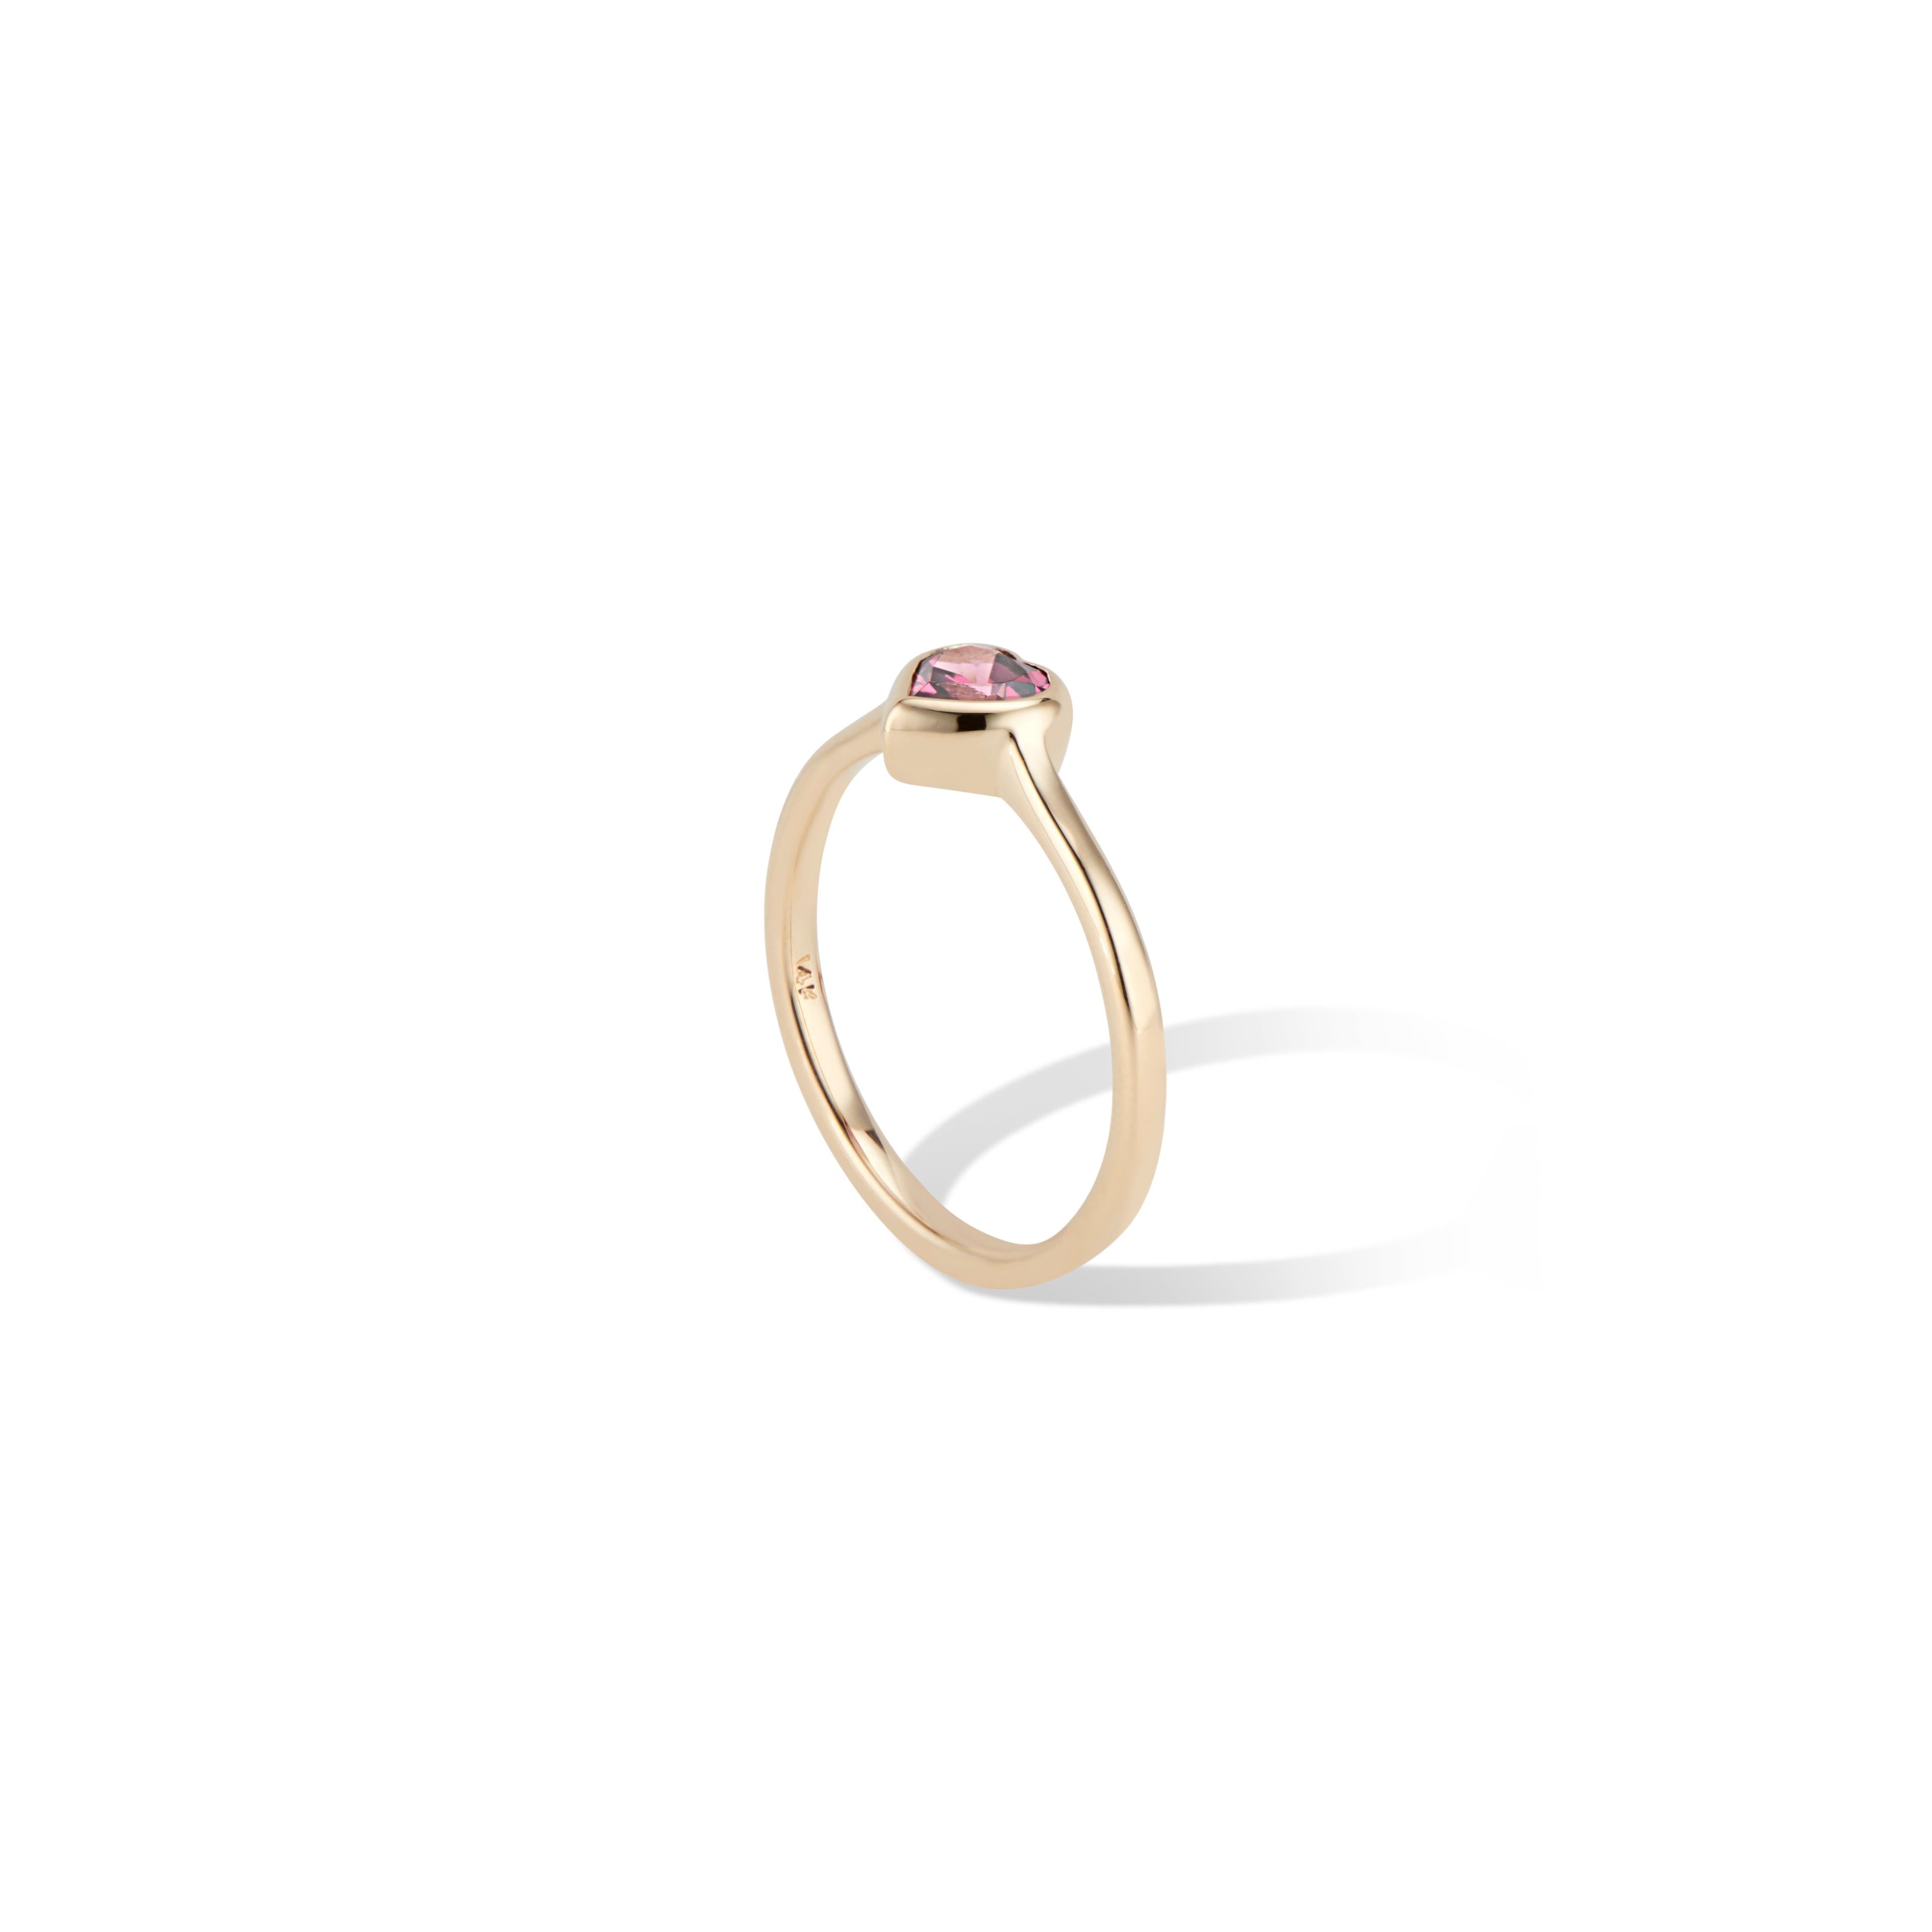 This petite Gold Heart Ring is perfect for stacking.
Featuring a striking ½ carat (.50tcw) Rhodolite Garnet Heart in a high polished 14k yellow gold bezel setting.
Available in 14 k yellow, rose and white gold.
Ring Size: US Size 6 - complimentary